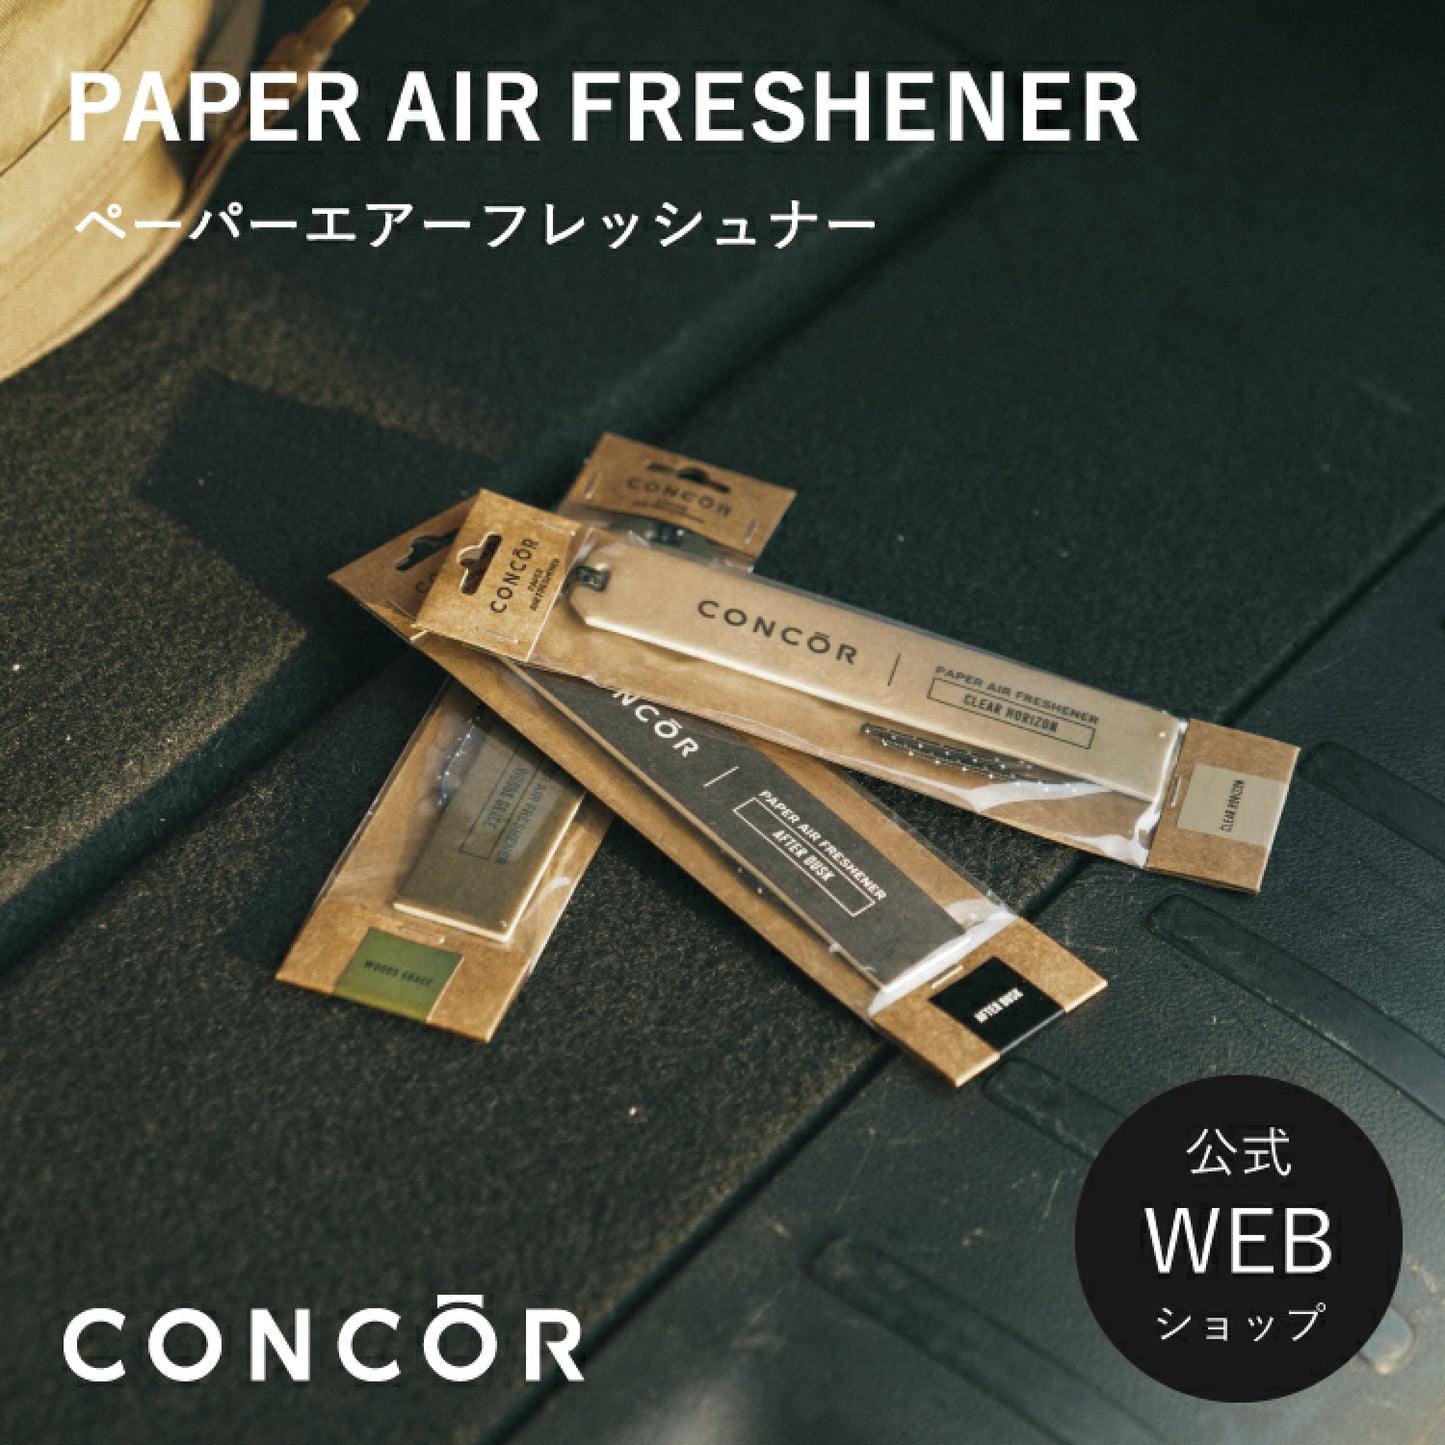 Concor Air Freshener for outdoor windmills